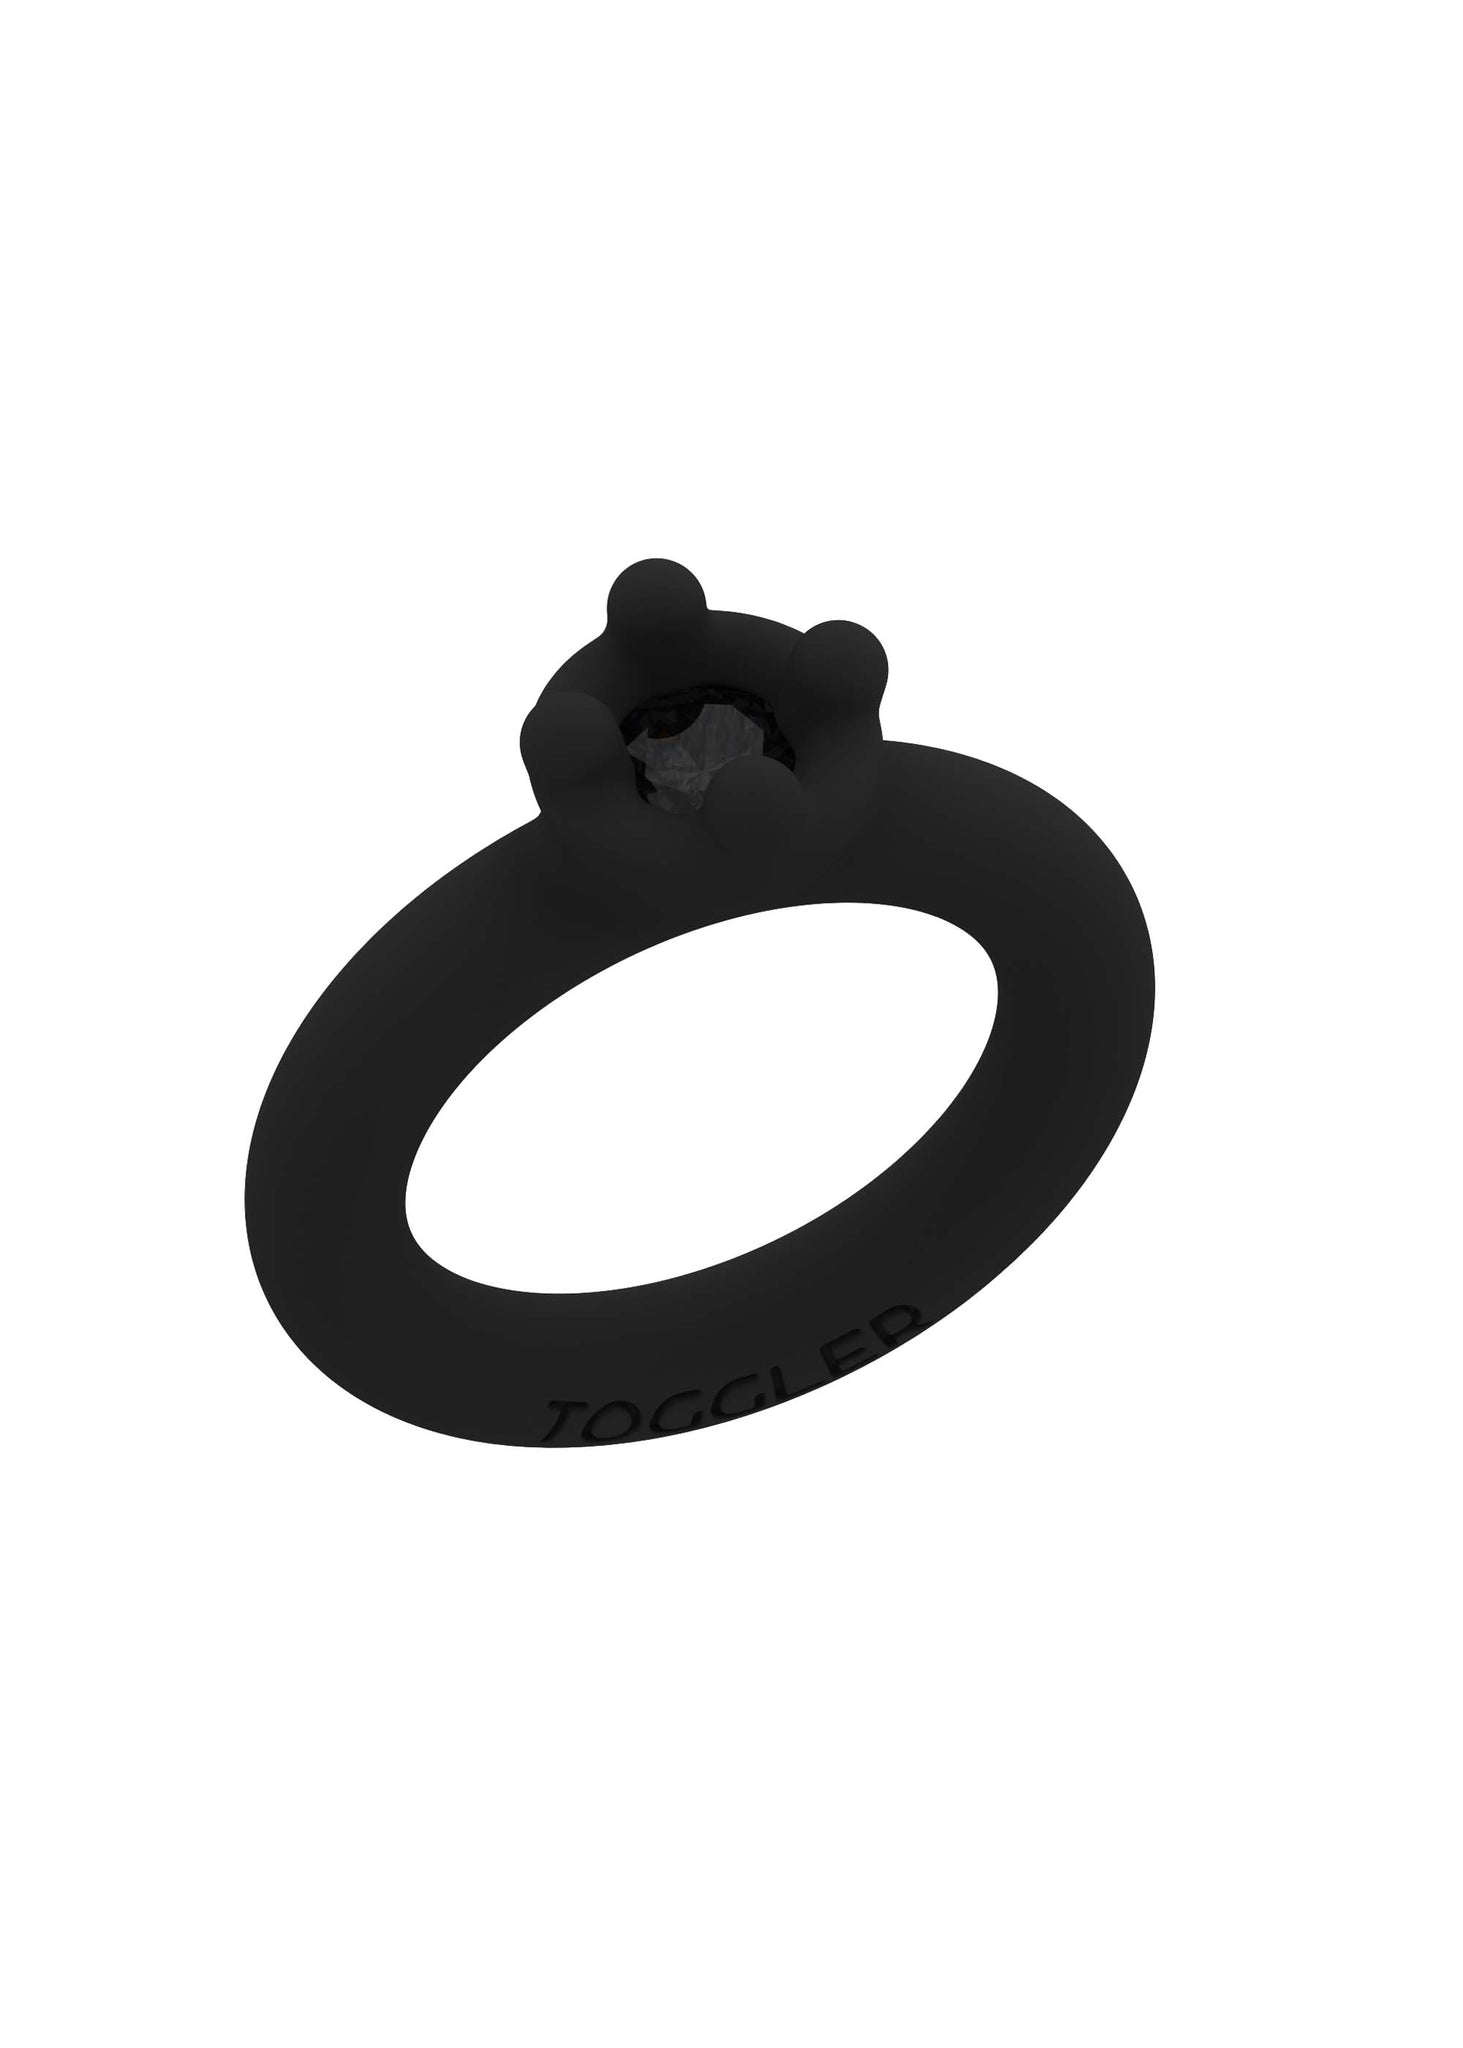 TOGGLER: Black Rubber Ring - 157Moments